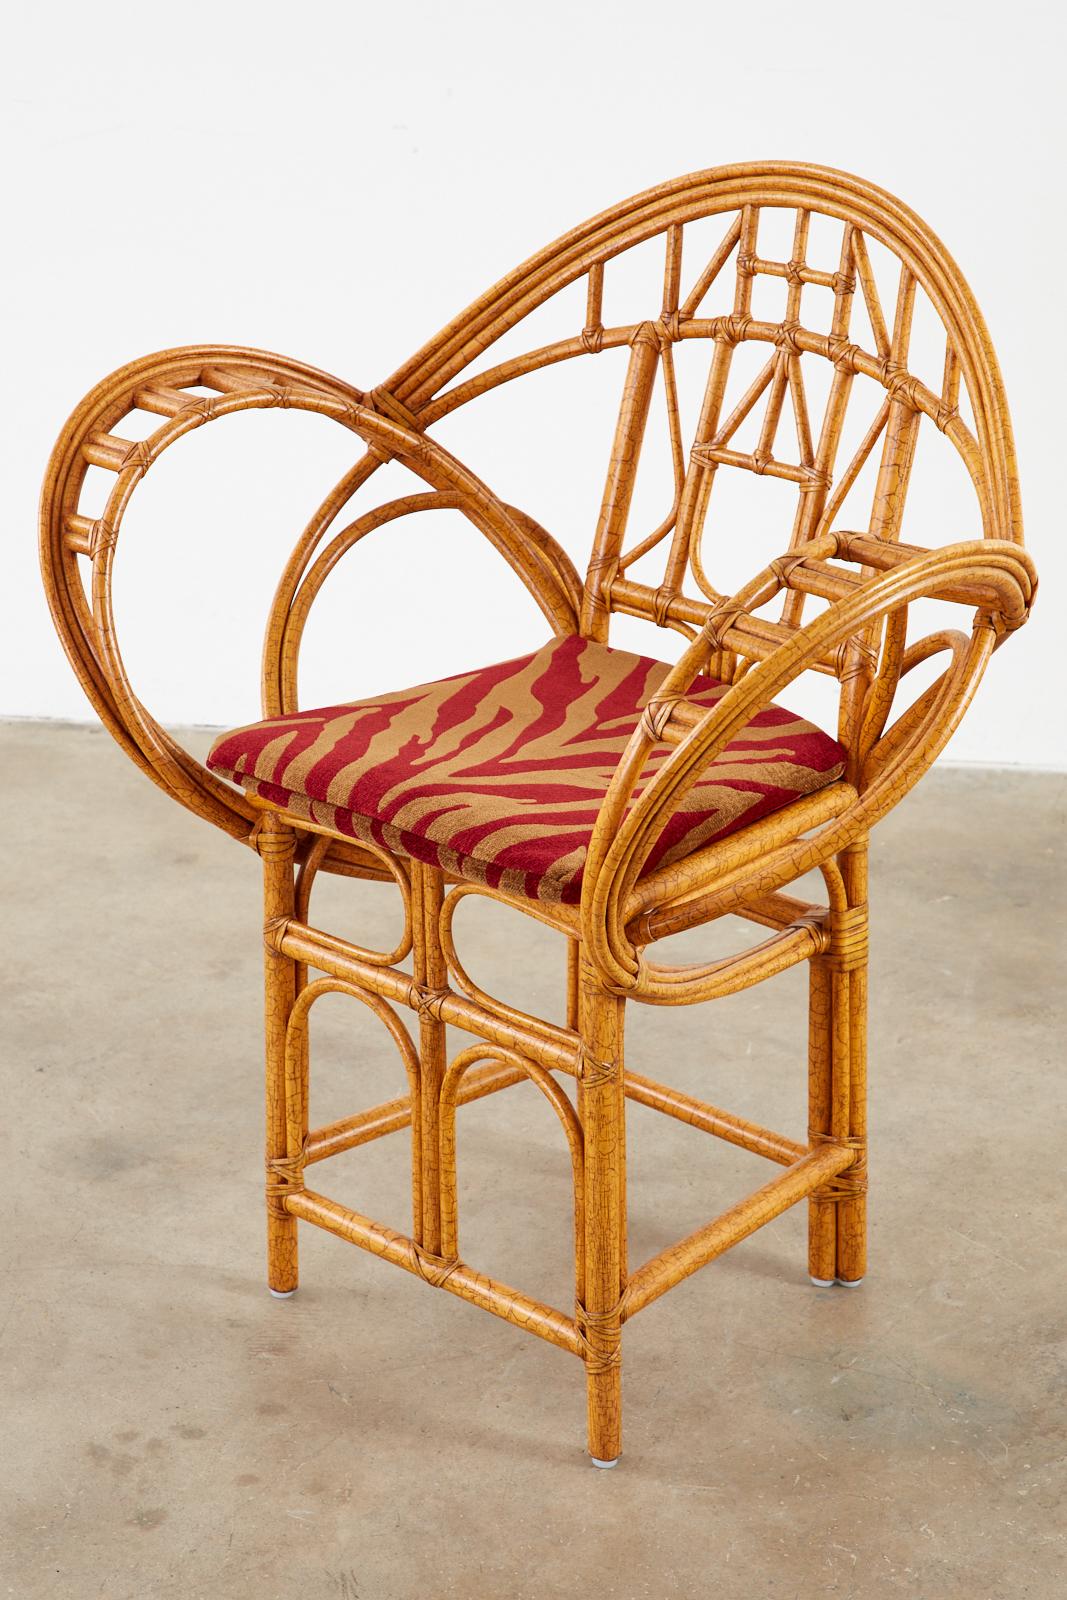 Sculptural bamboo rattan peacock style armchair designed by Edward Tuttle for McGuire. Known as the butterfly chair featuring gracefully curved rattan poles made in the California organic modern style. The rattan is lashed together using leather